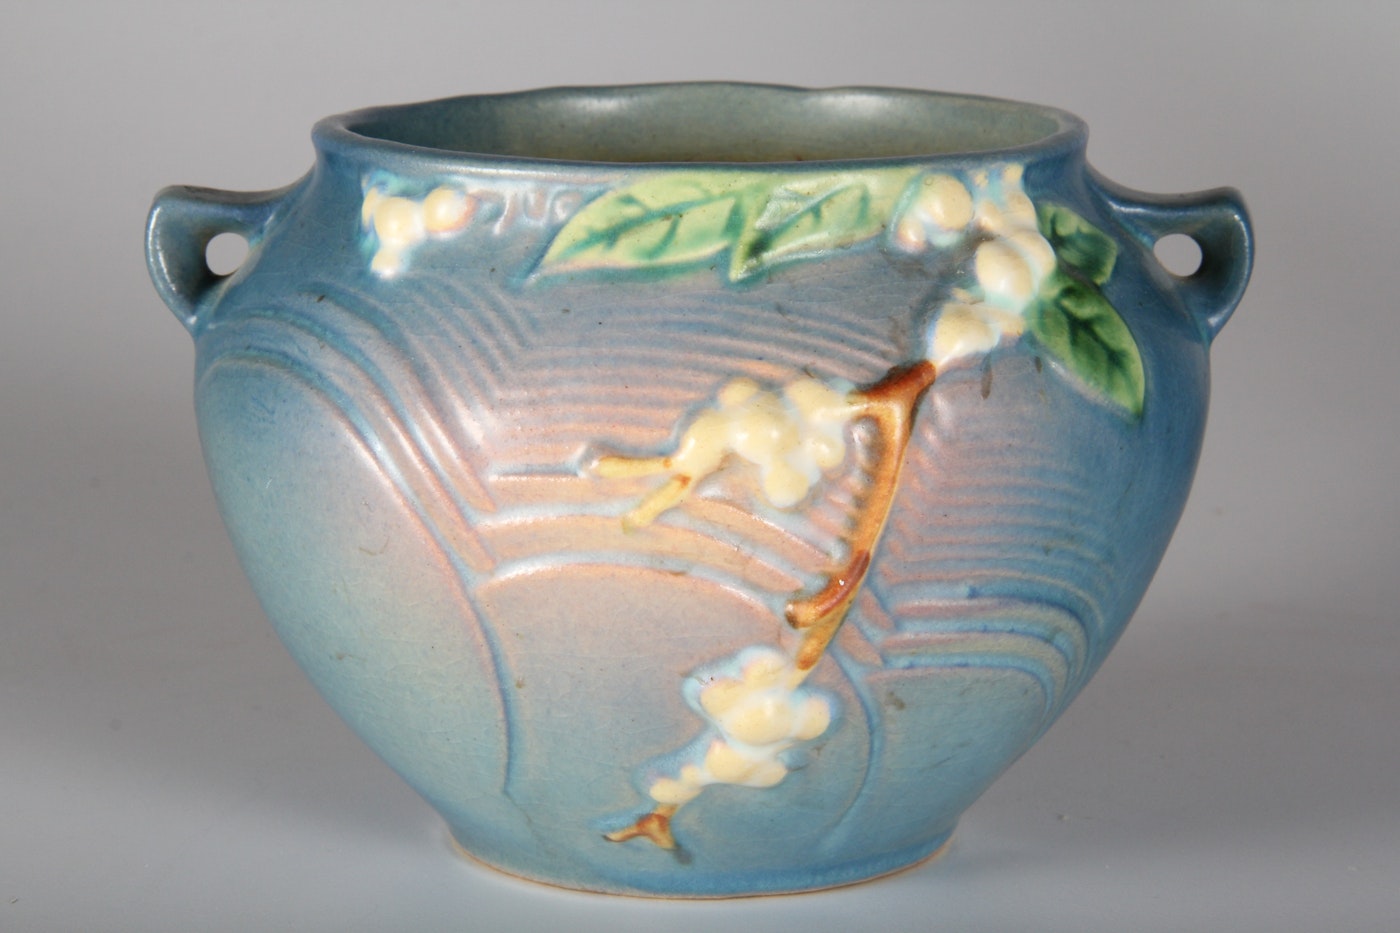 Roseville Pottery Snowberry Blue Two Handle Bowl and Vase | EBTH